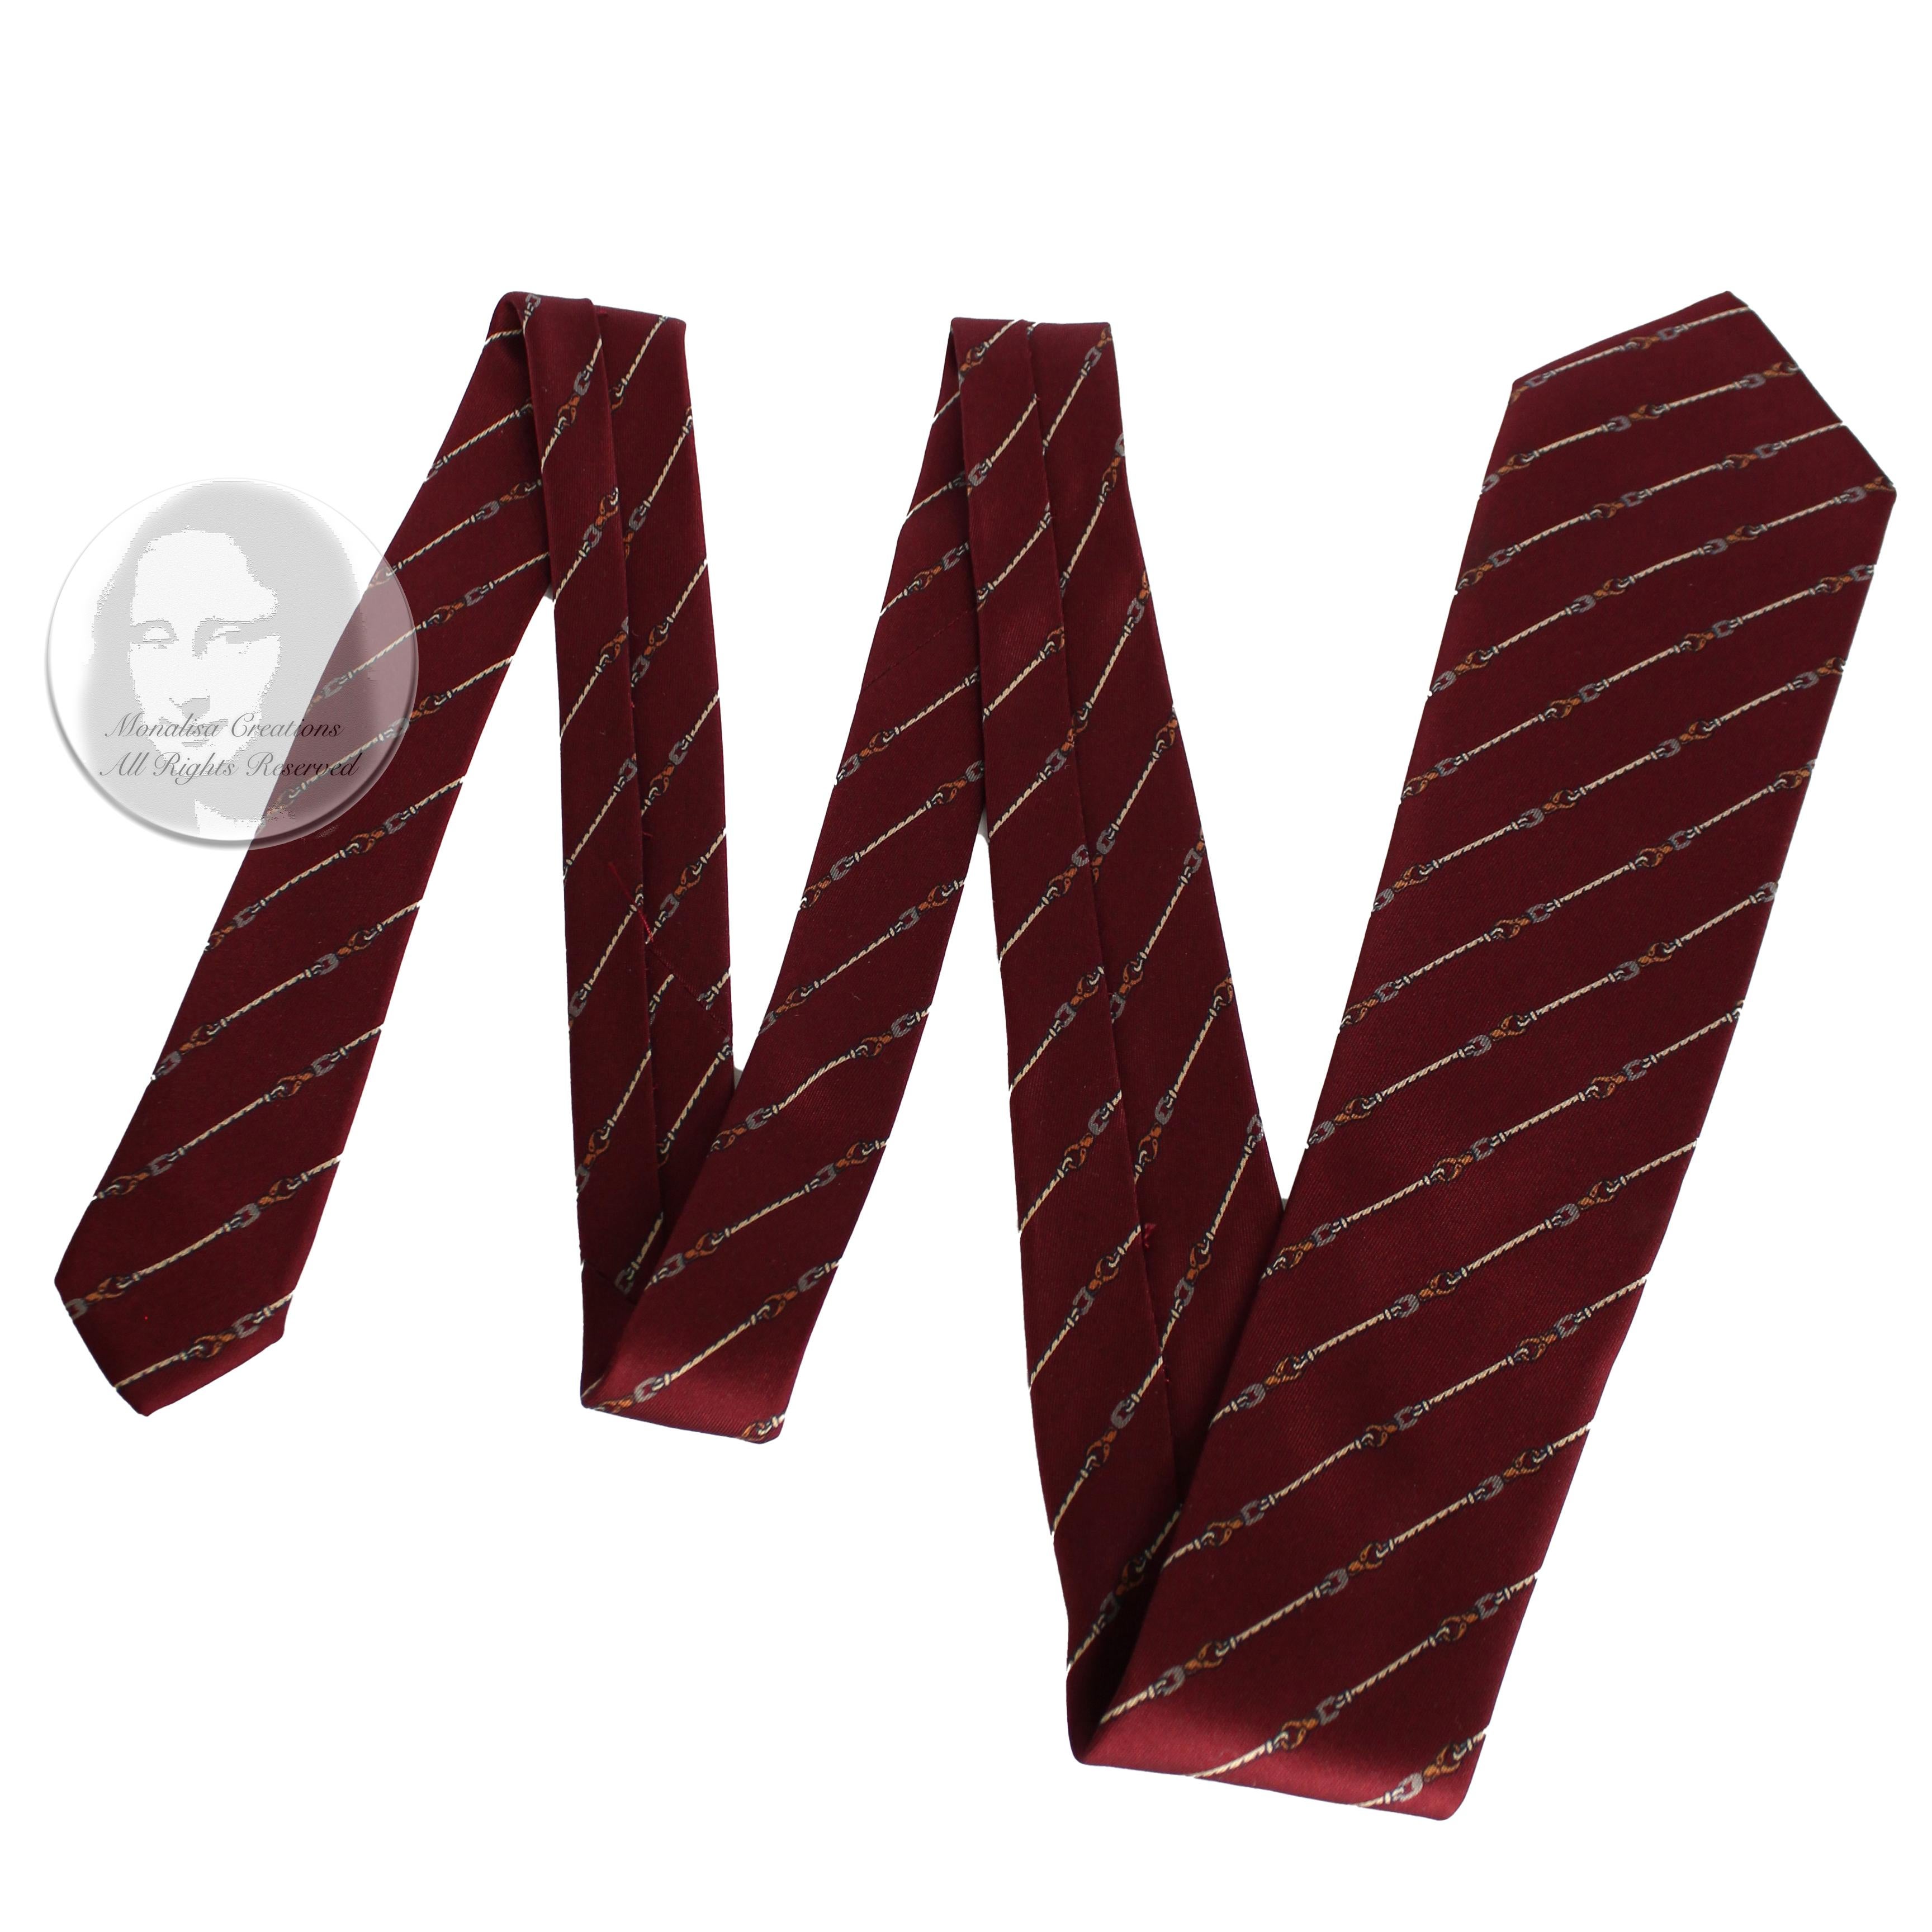 Preowned, authentic, vintage Gucci men's necktie, likely made in the 1970s. Made from silk, it features an understated yet classic horse bit print against a brick red background.  

A wonderfully stylish necktie from luxury fashion house Gucci in a